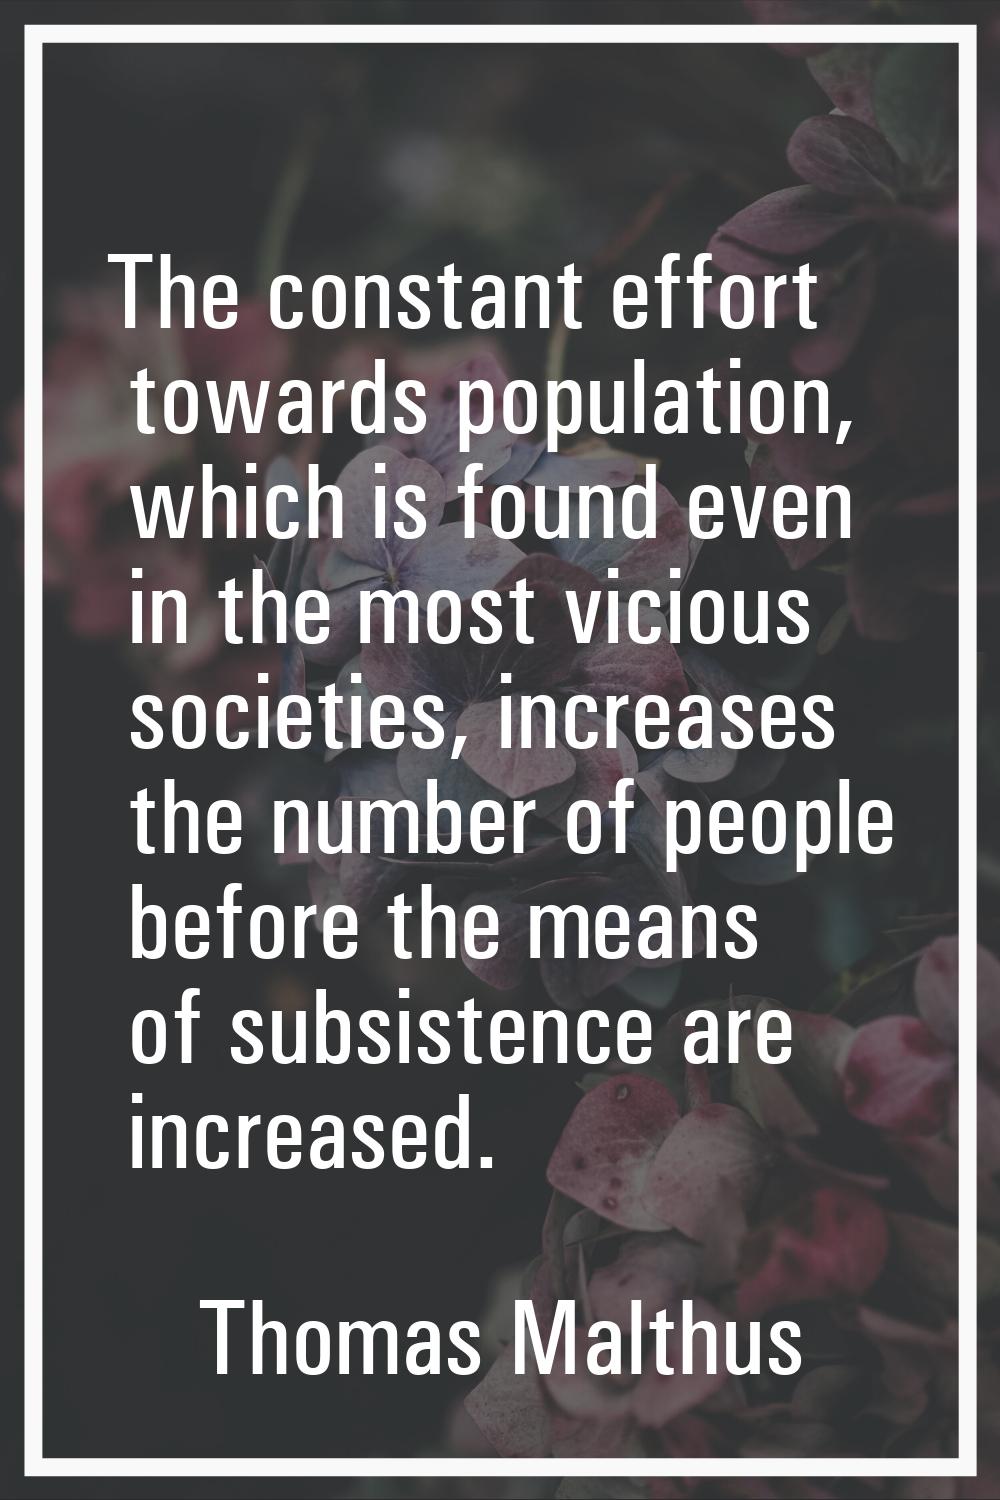 The constant effort towards population, which is found even in the most vicious societies, increase